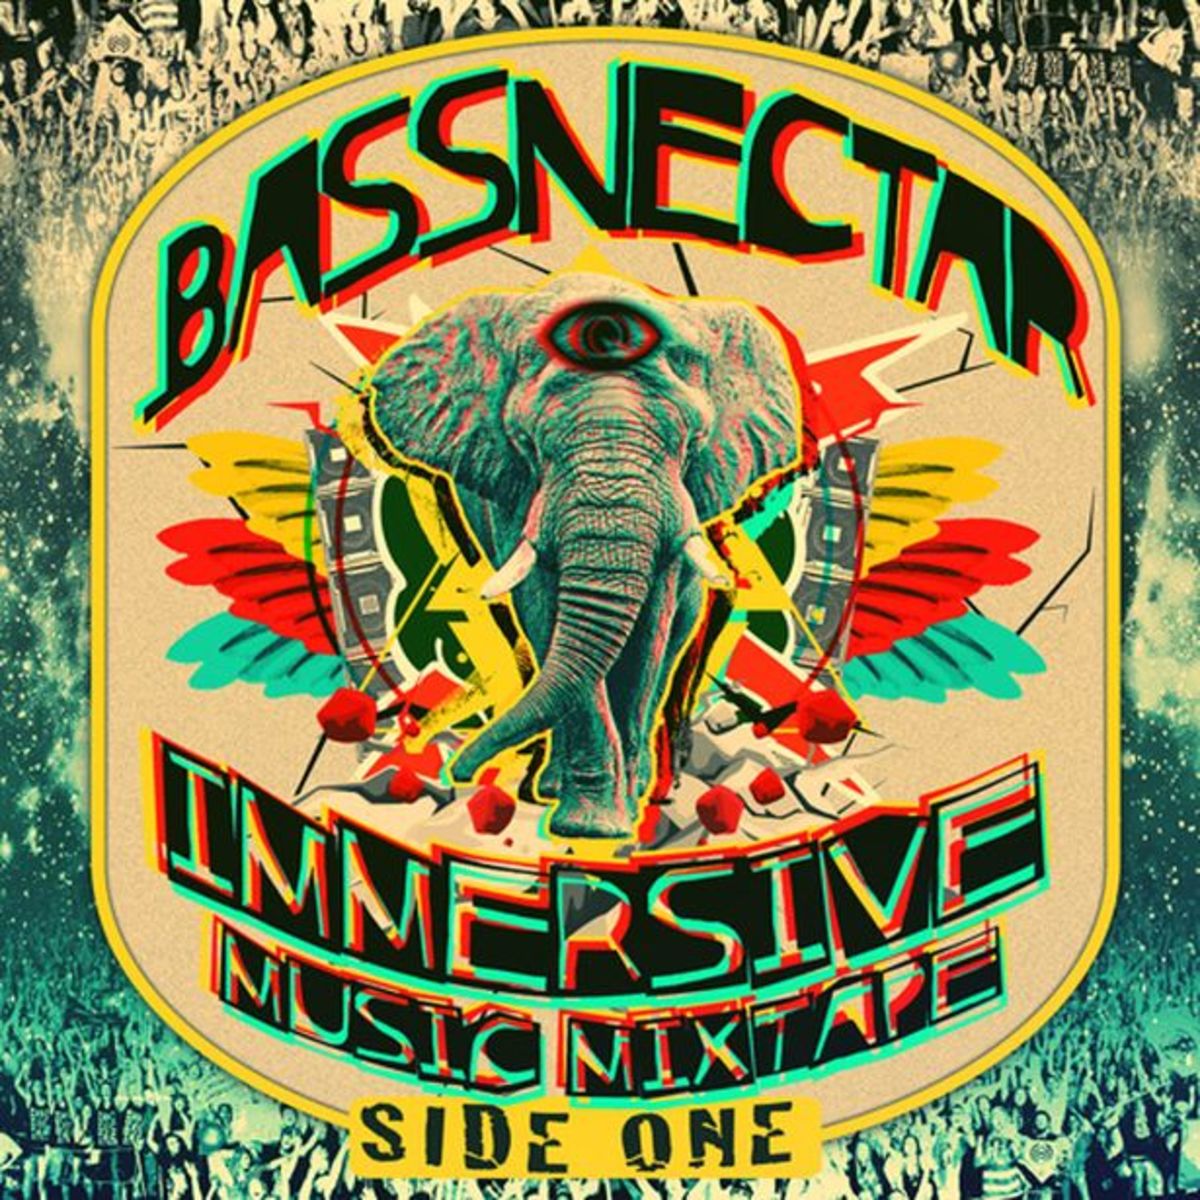 EDM Download: Bassnectar Releases Immersive Music Mixtape To Promote His Fall Tour With "Koan Sound"